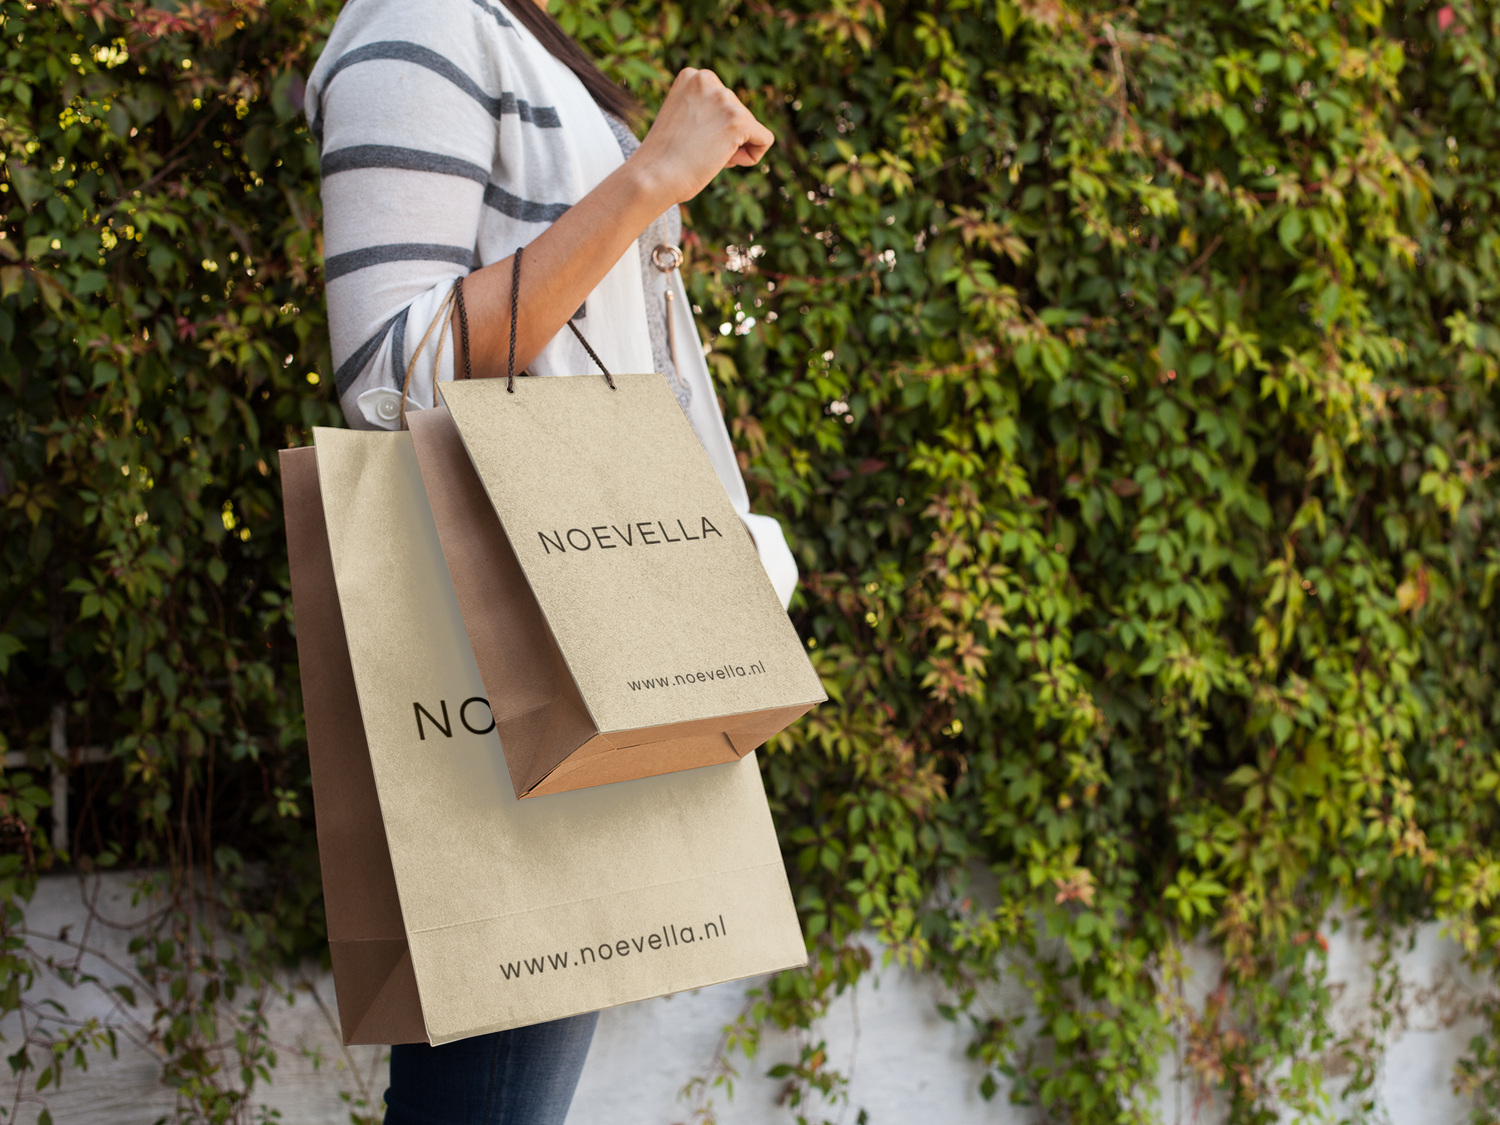 paper-bag-mockup-of-a-woman-carrying-two-shopping-bags-a6683_2_a4f92084-21a8-4a7e-a310-d4c89c0d1293